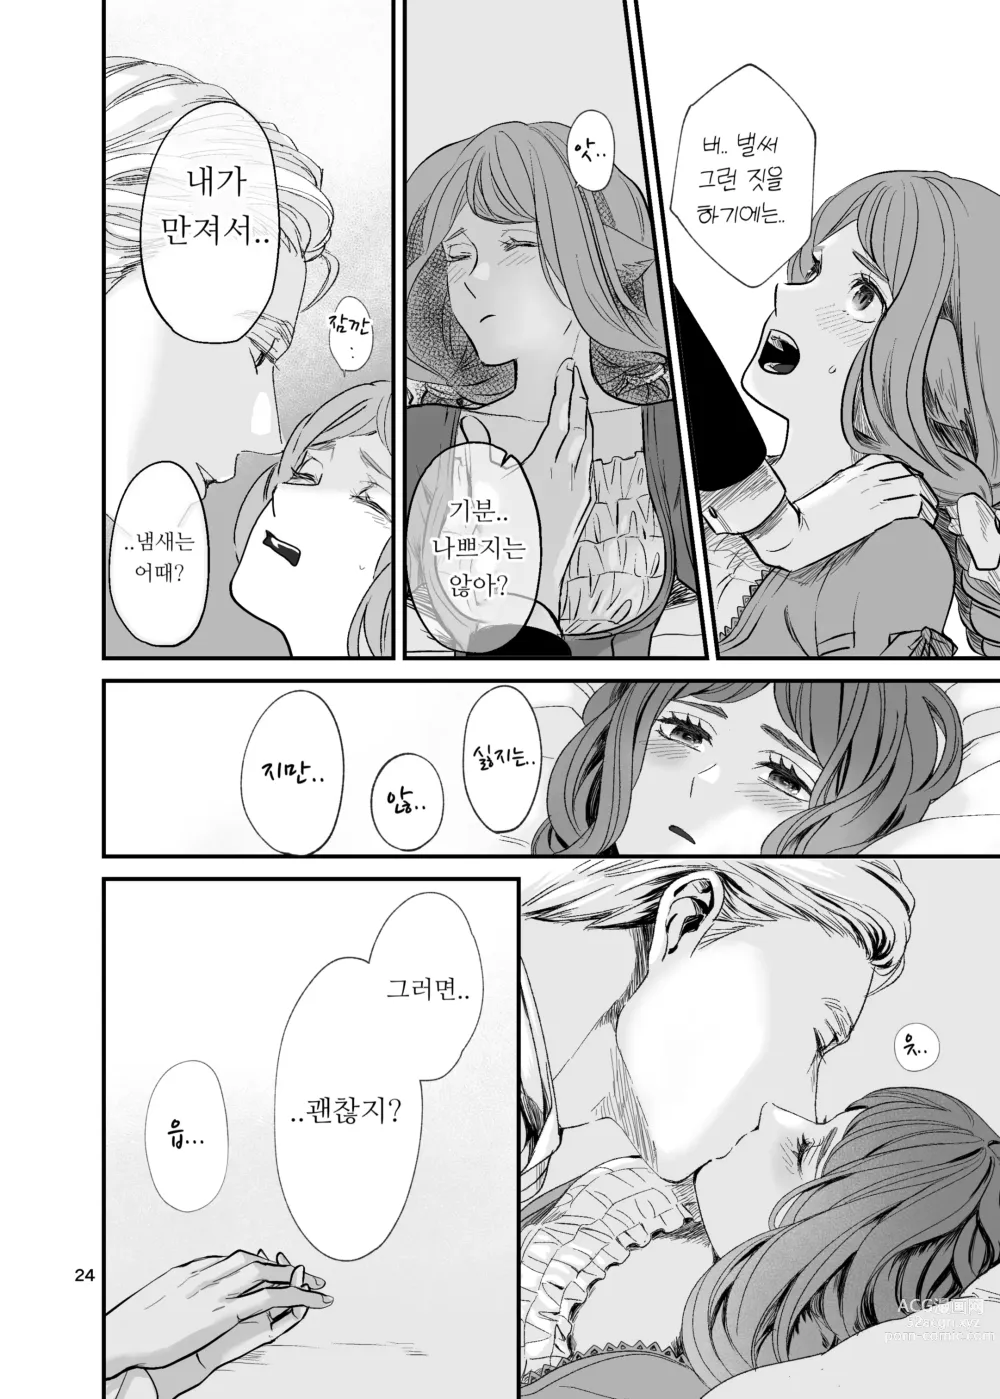 Page 24 of doujinshi 수인 영애와 혼약자